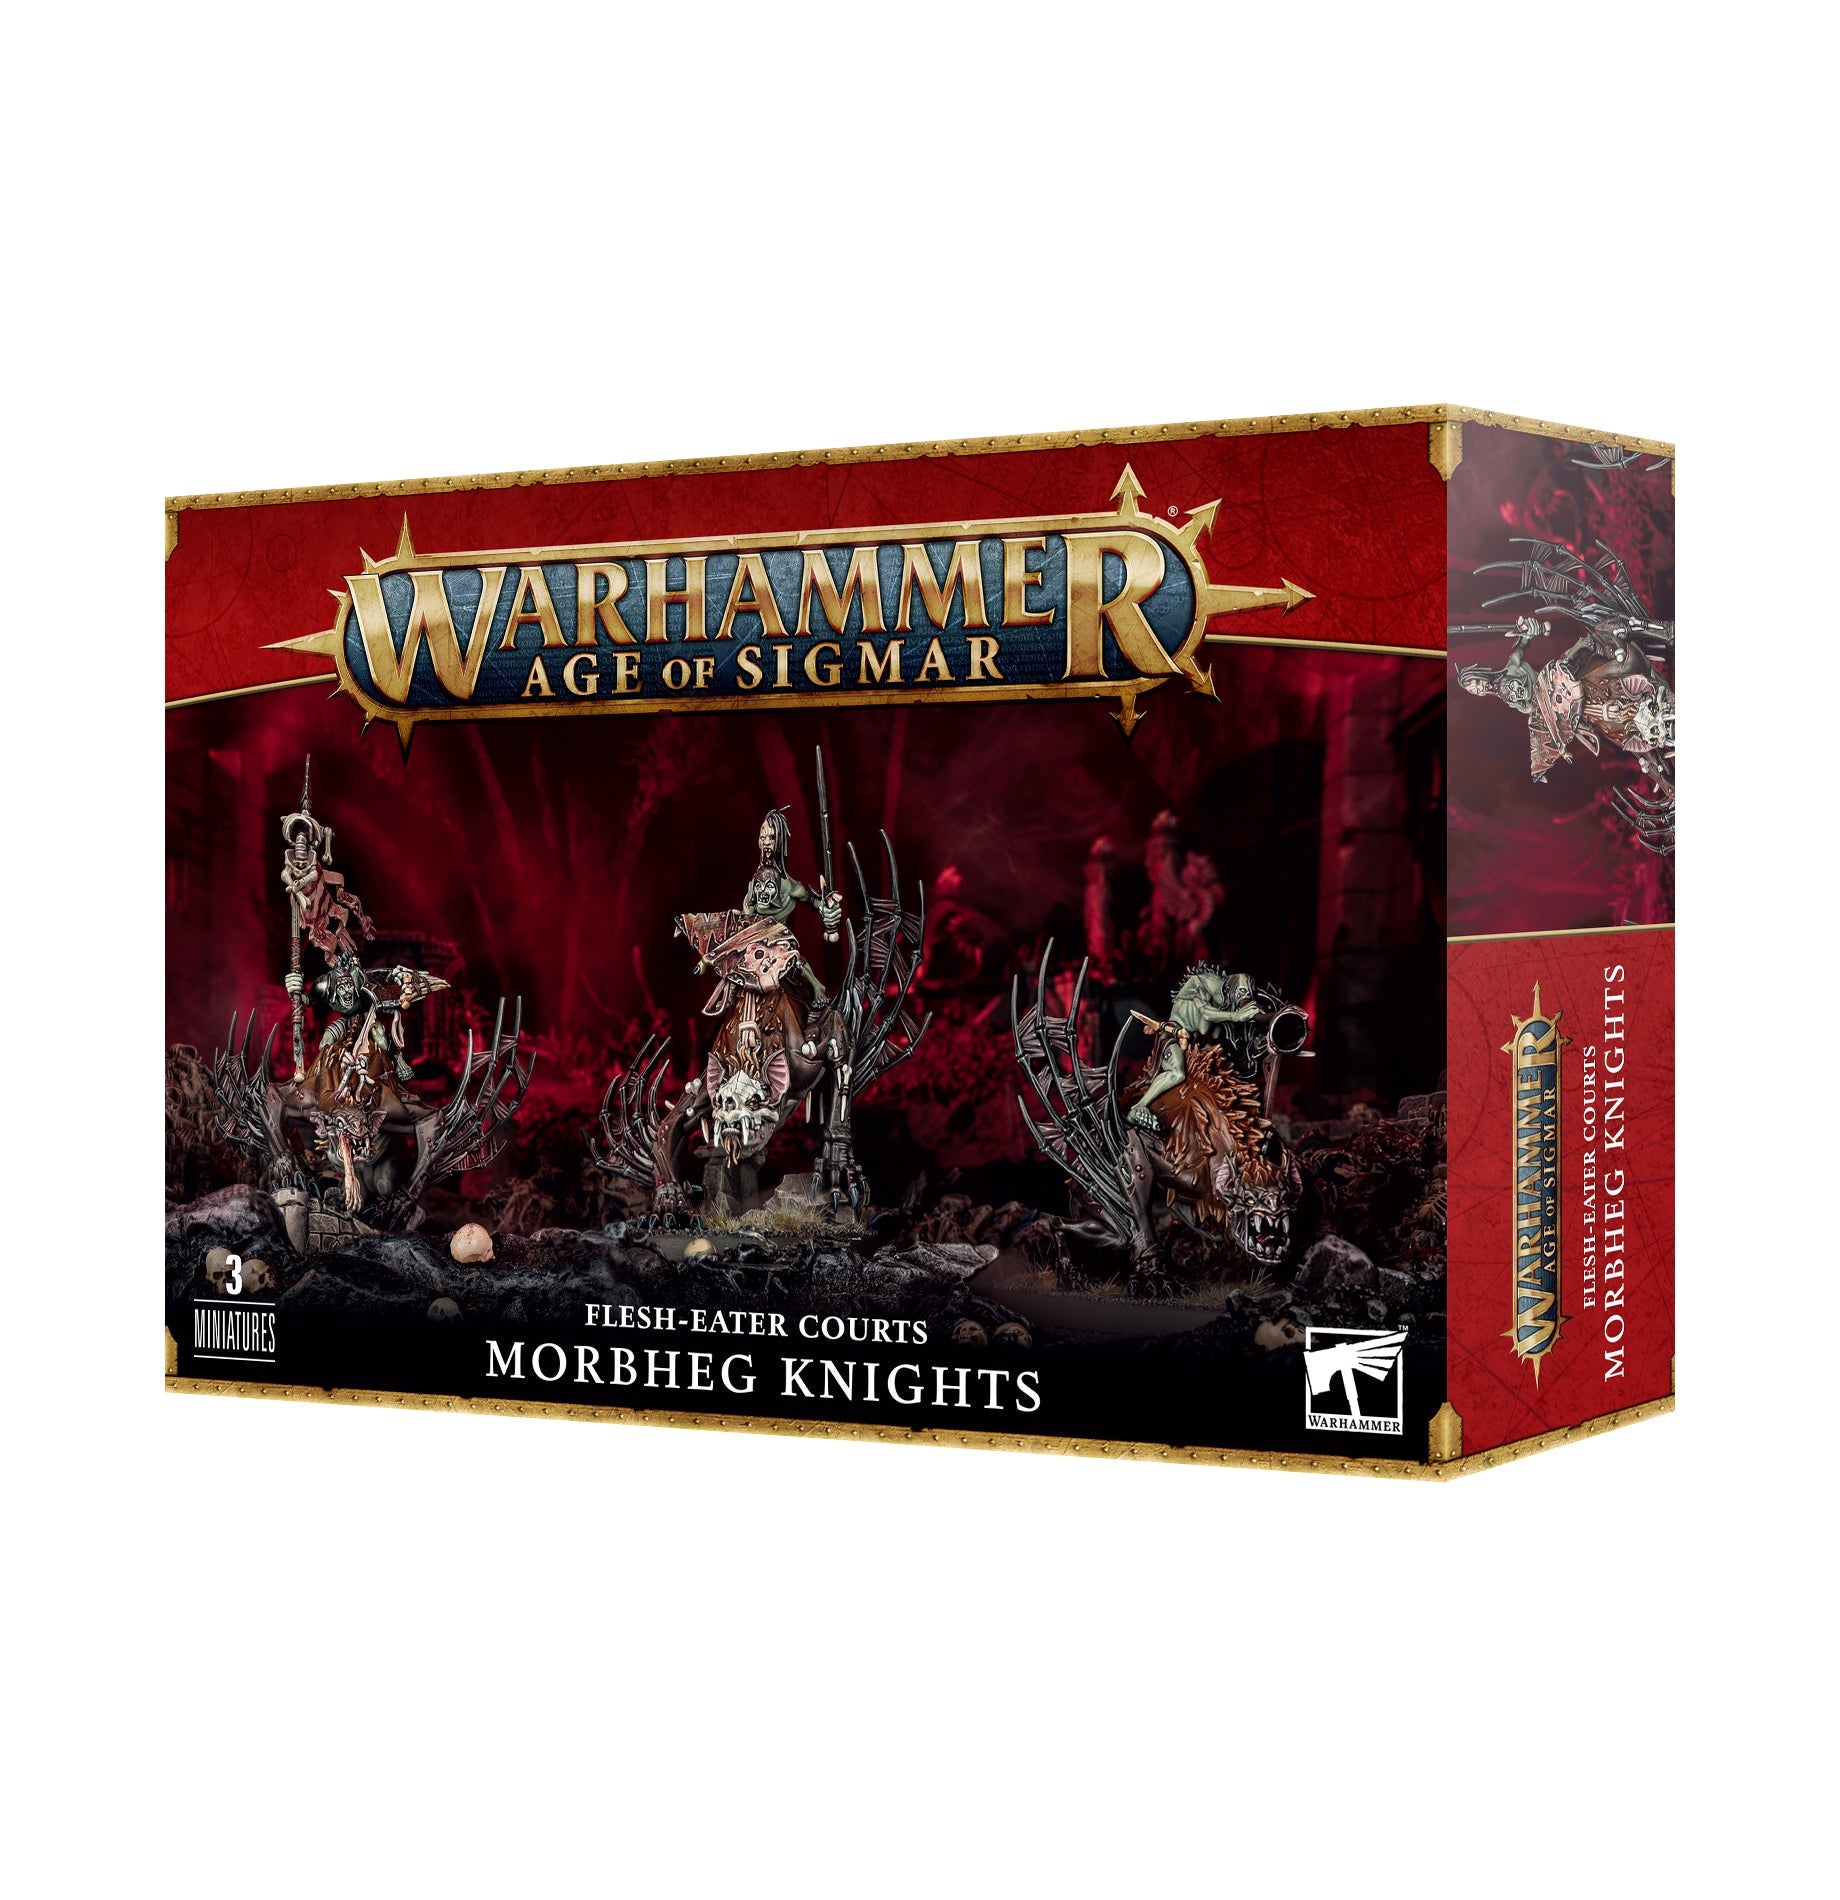 Warhammer: Age of Sigmar: Flesh-Eater Courts: Morbheg Knights